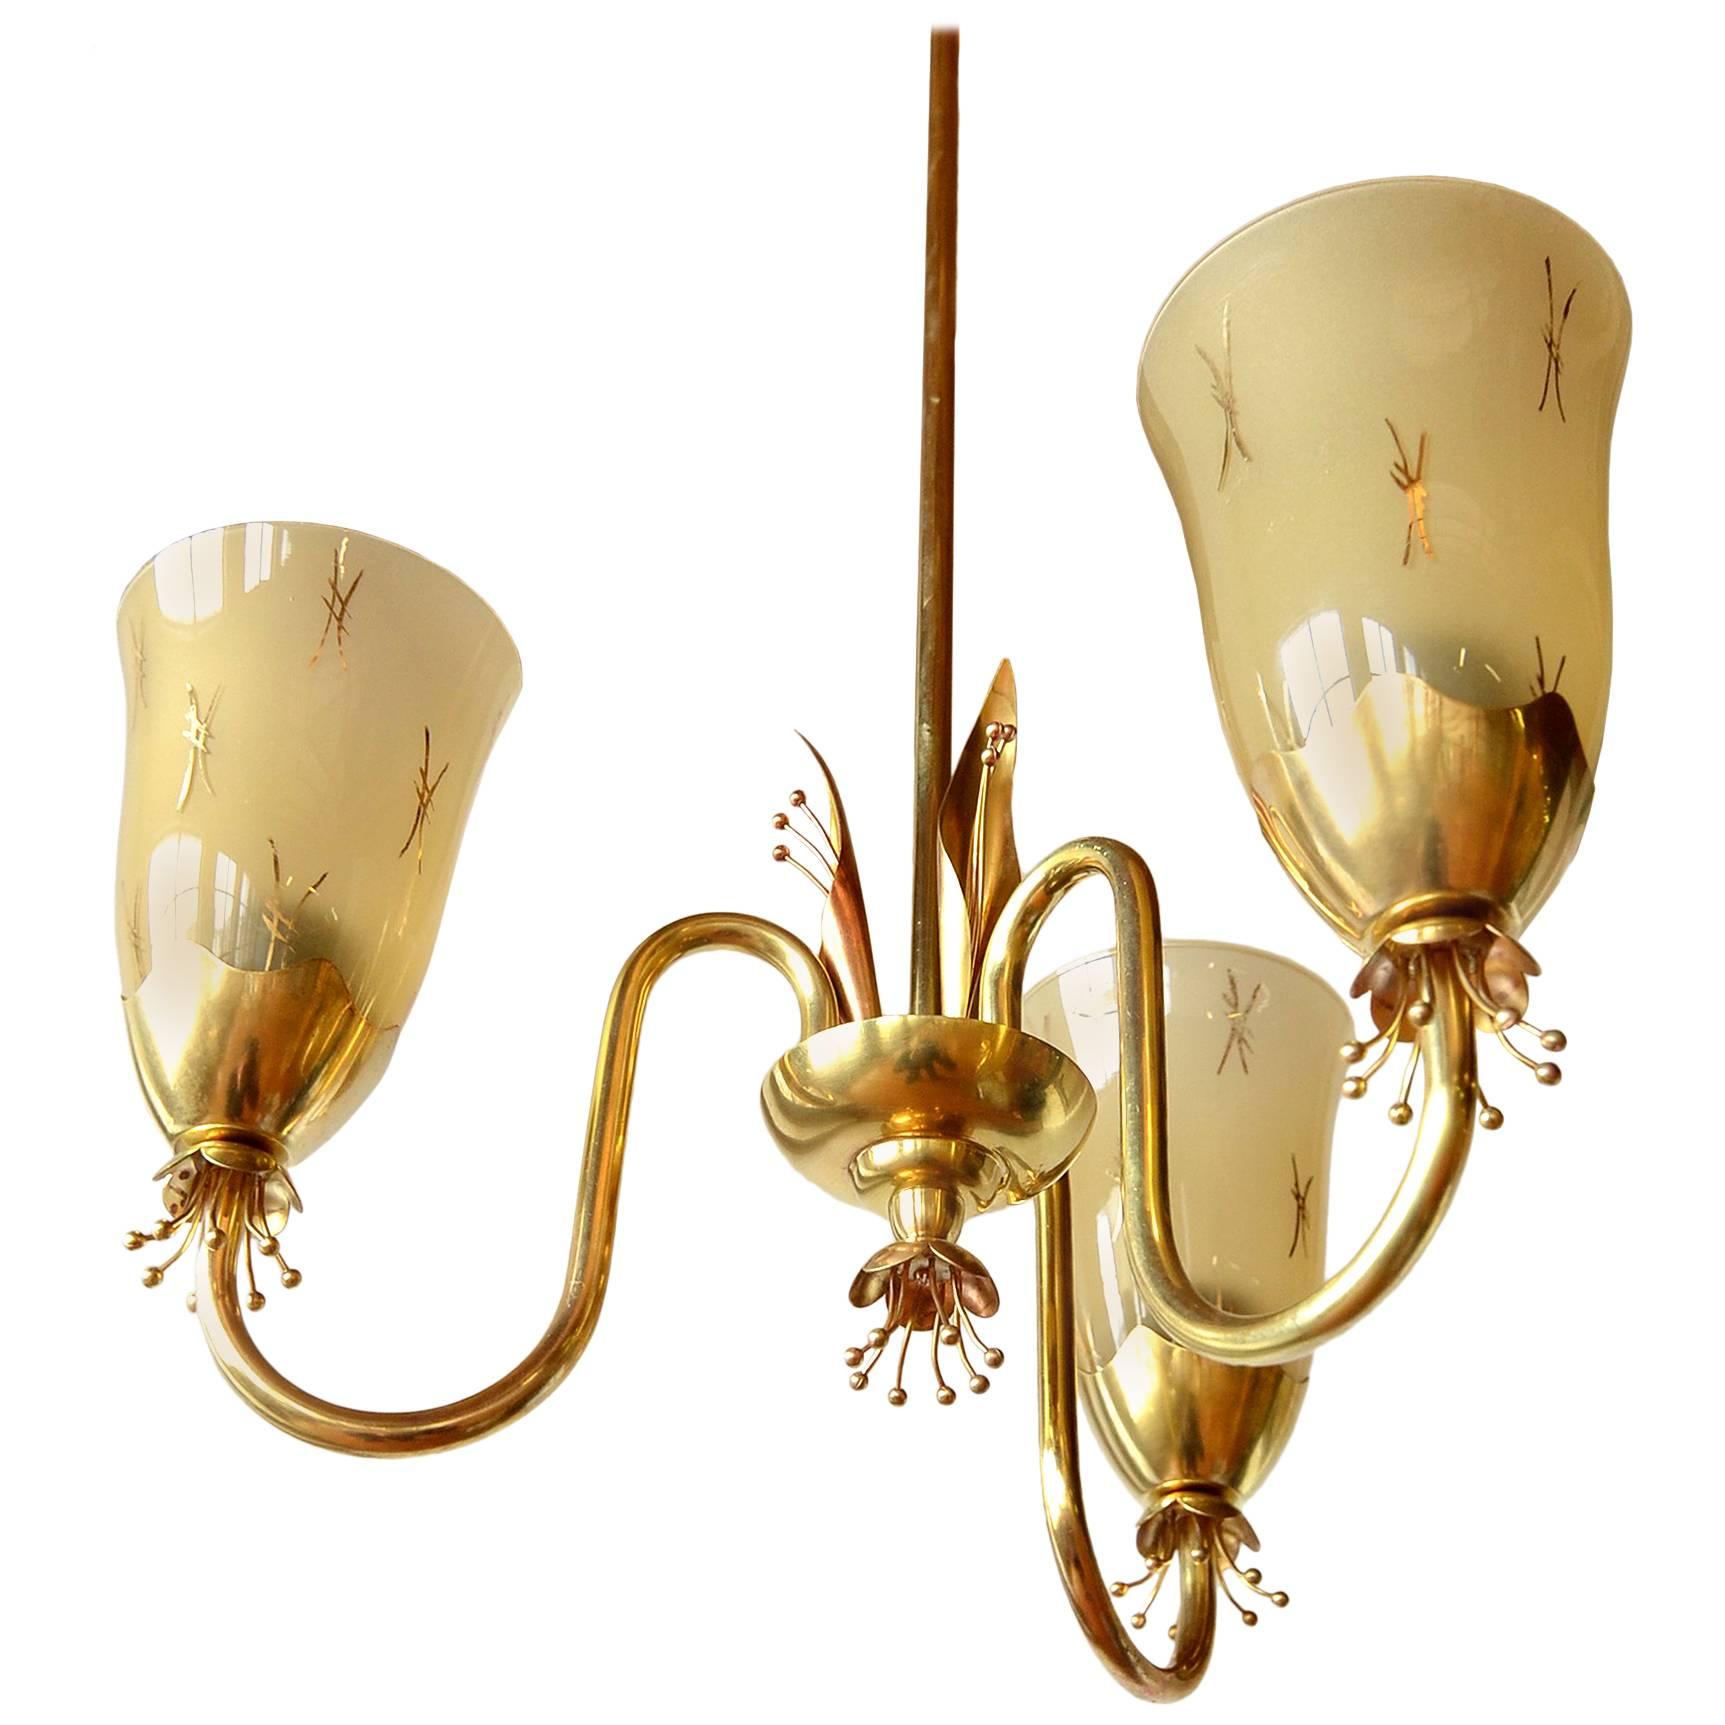 A stunning solid brass and frosted glass chandelier by Paavo Tynell for Idman, circa 1955.

This example has an incredibly bright finish. Resembles a gilded brass.

Beautiful executed handmade solid brass flower drops and spiral